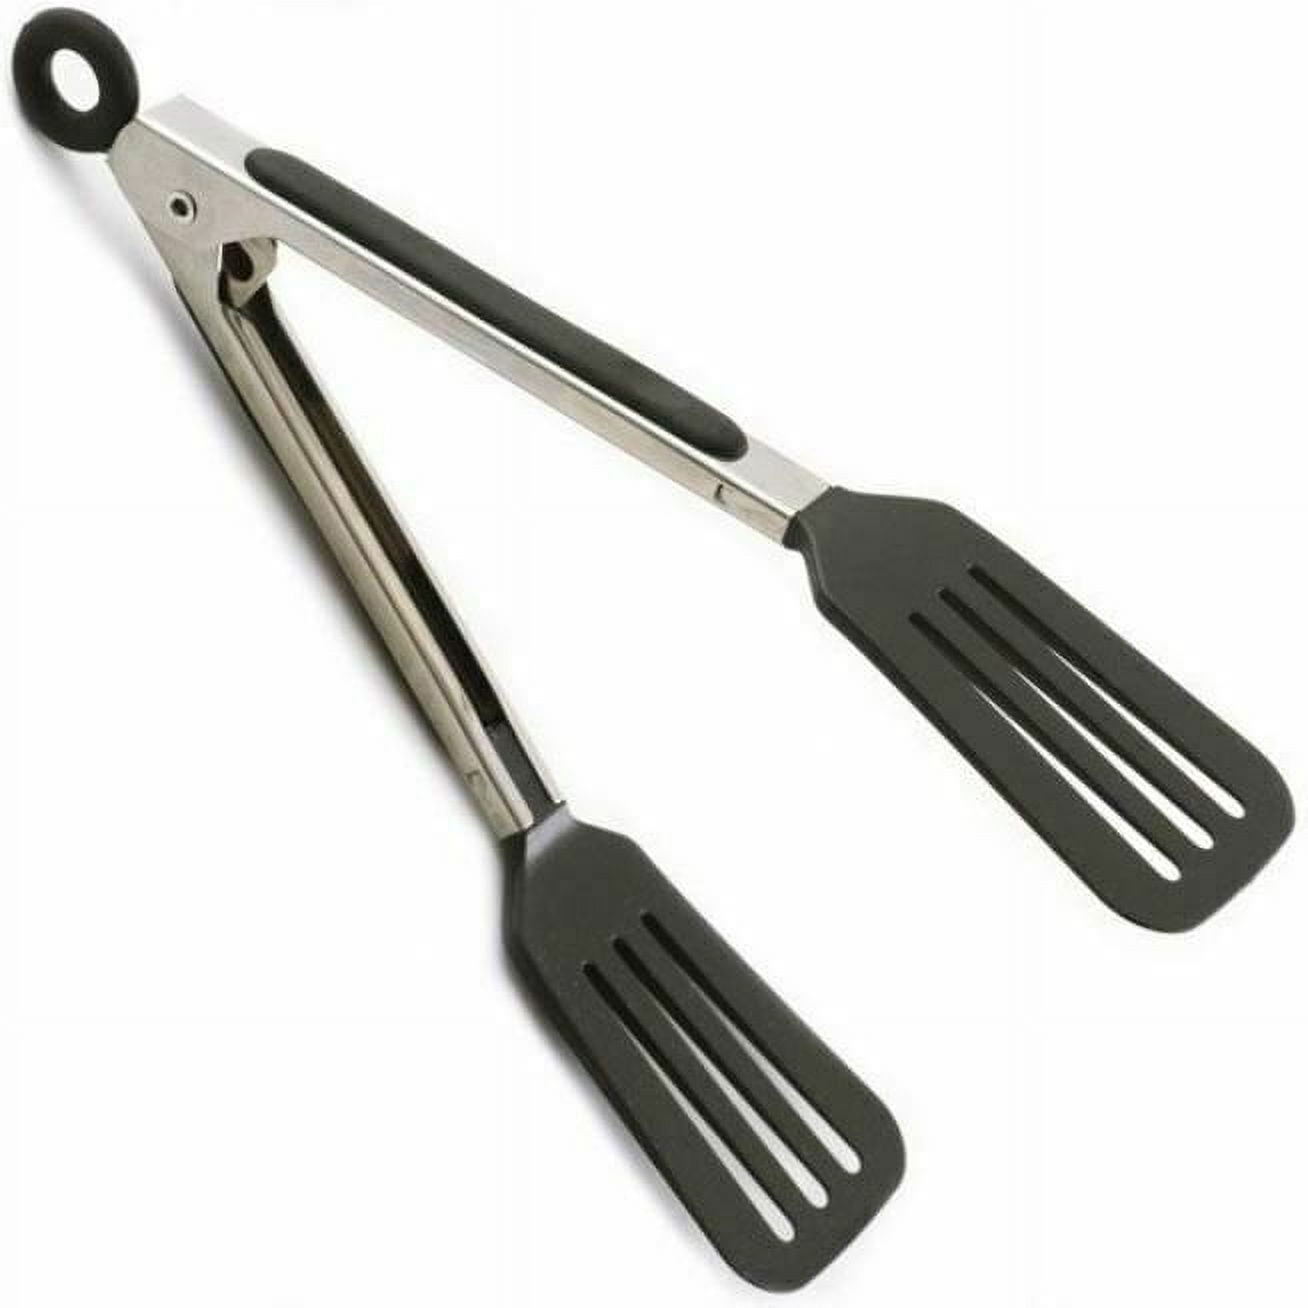 Stainless Steel Mini Serving Spatula, Culinary Kitchen Spatula for Serving  and Turning, Mini Slotted…See more Stainless Steel Mini Serving Spatula